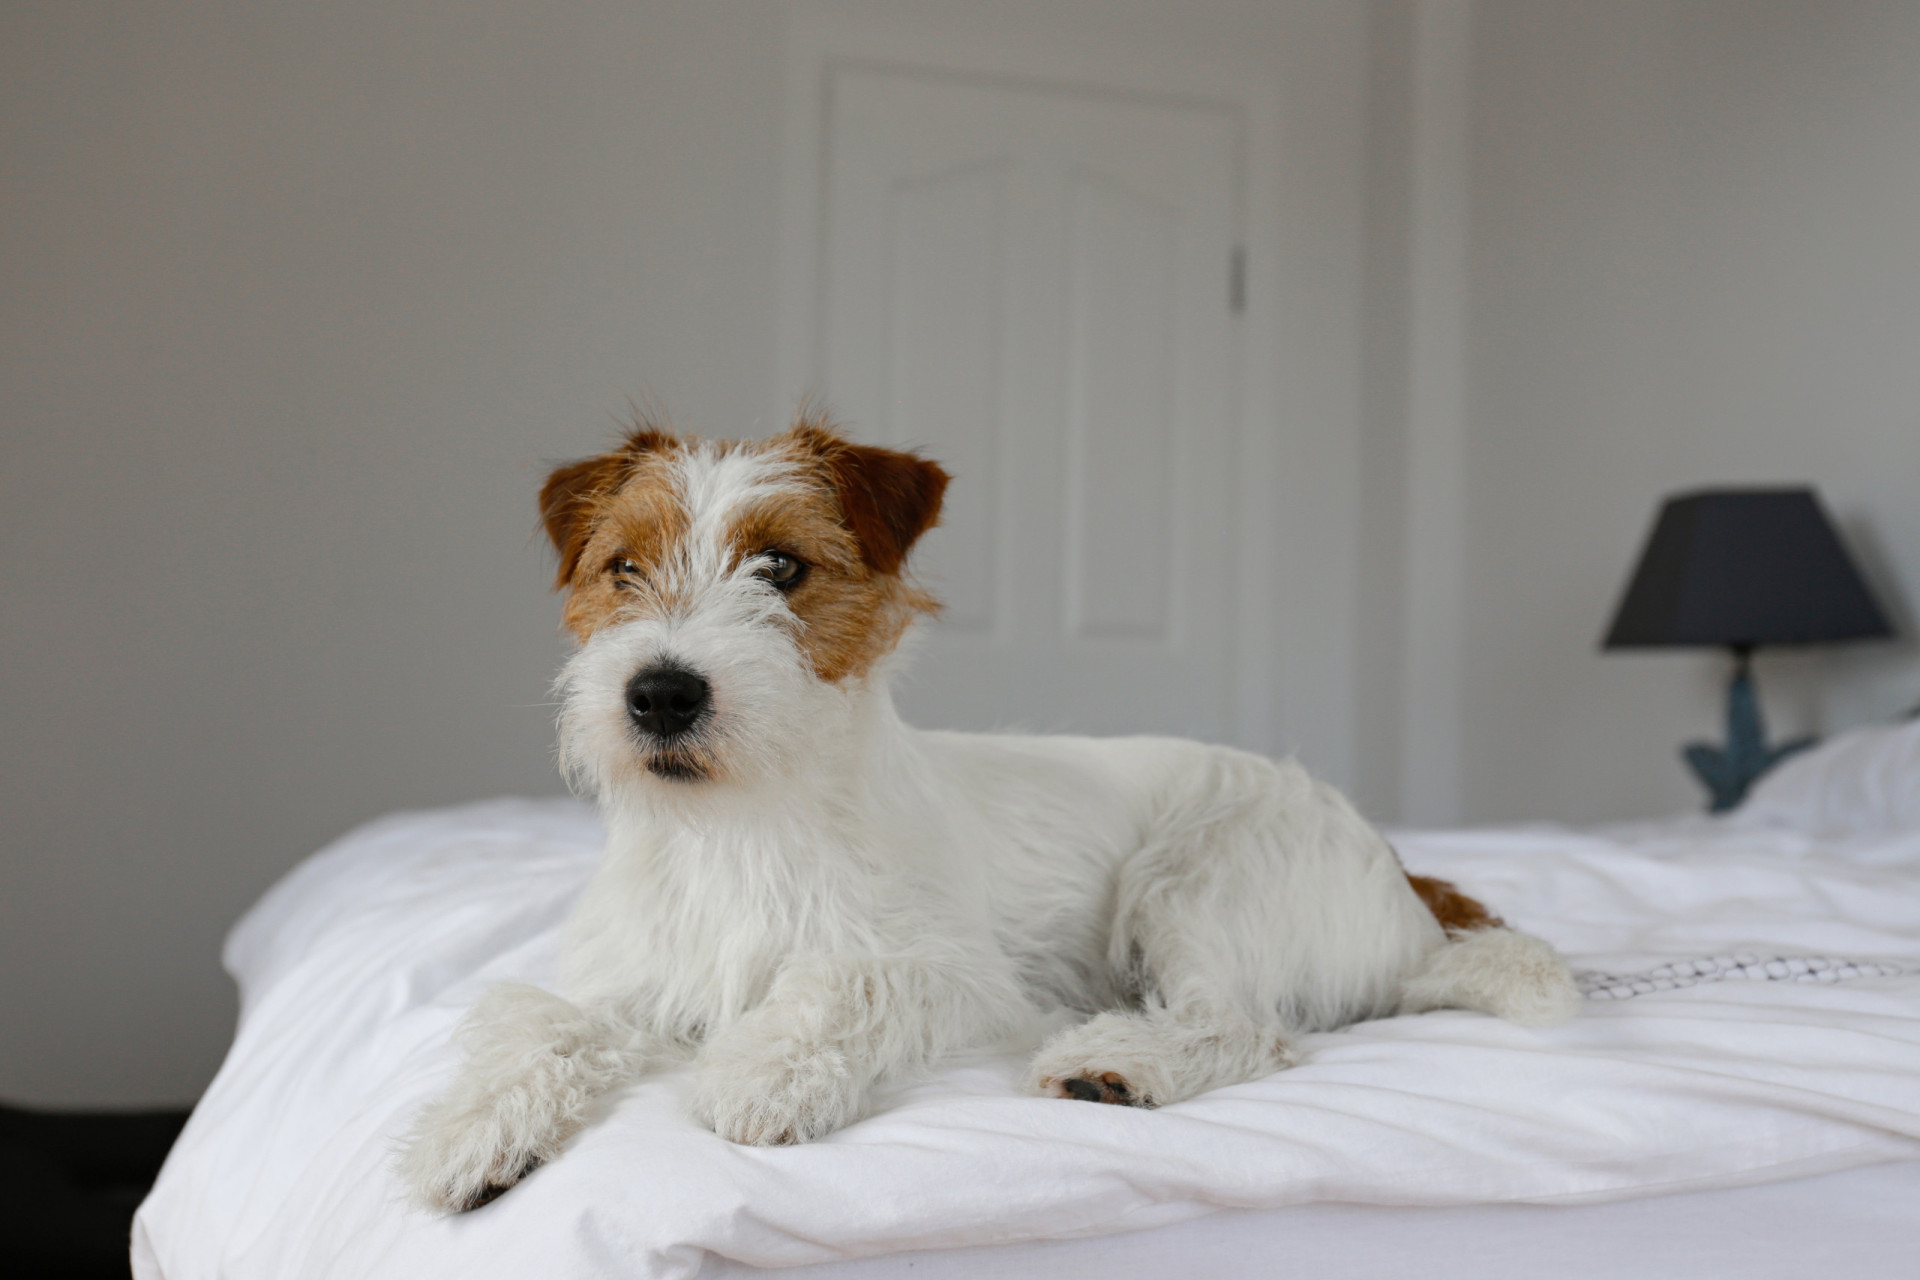 <p>Originating in England and evolving in Australia, the Jack Russell Terrier is a strong and sturdy breed. Their average life expectancy is 16 years.</p><p>You may also like:<a href="https://www.starsinsider.com/n/304001?utm_source=msn.com&utm_medium=display&utm_campaign=referral_description&utm_content=605595en-us"> Fountain of youth: These foods can help you look younger</a></p>